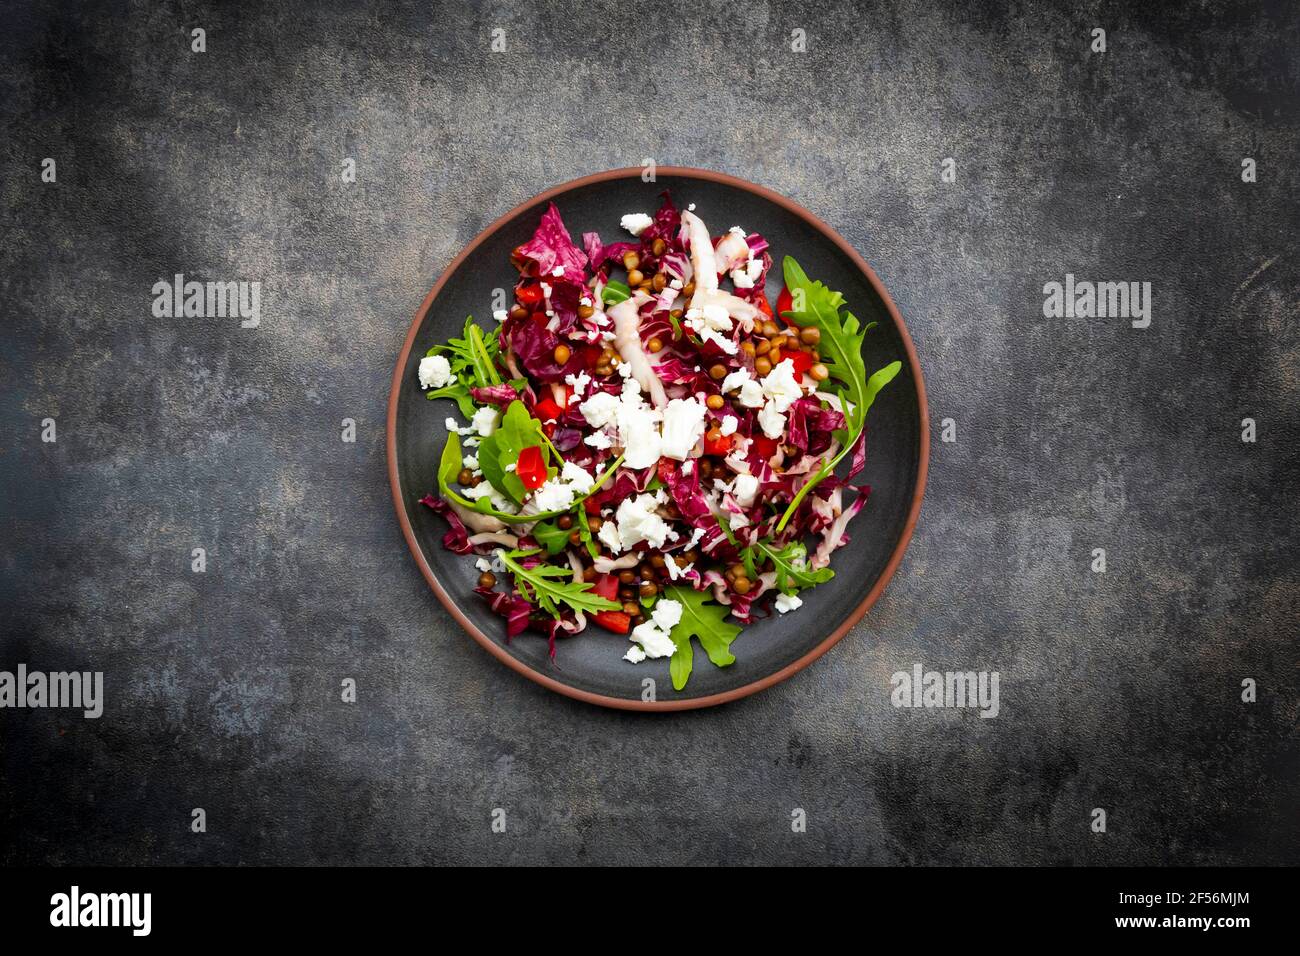 Studio shot of plate of vegetarian salad with lentils, arugula, feta cheese, radicchio and bell pepper Stock Photo